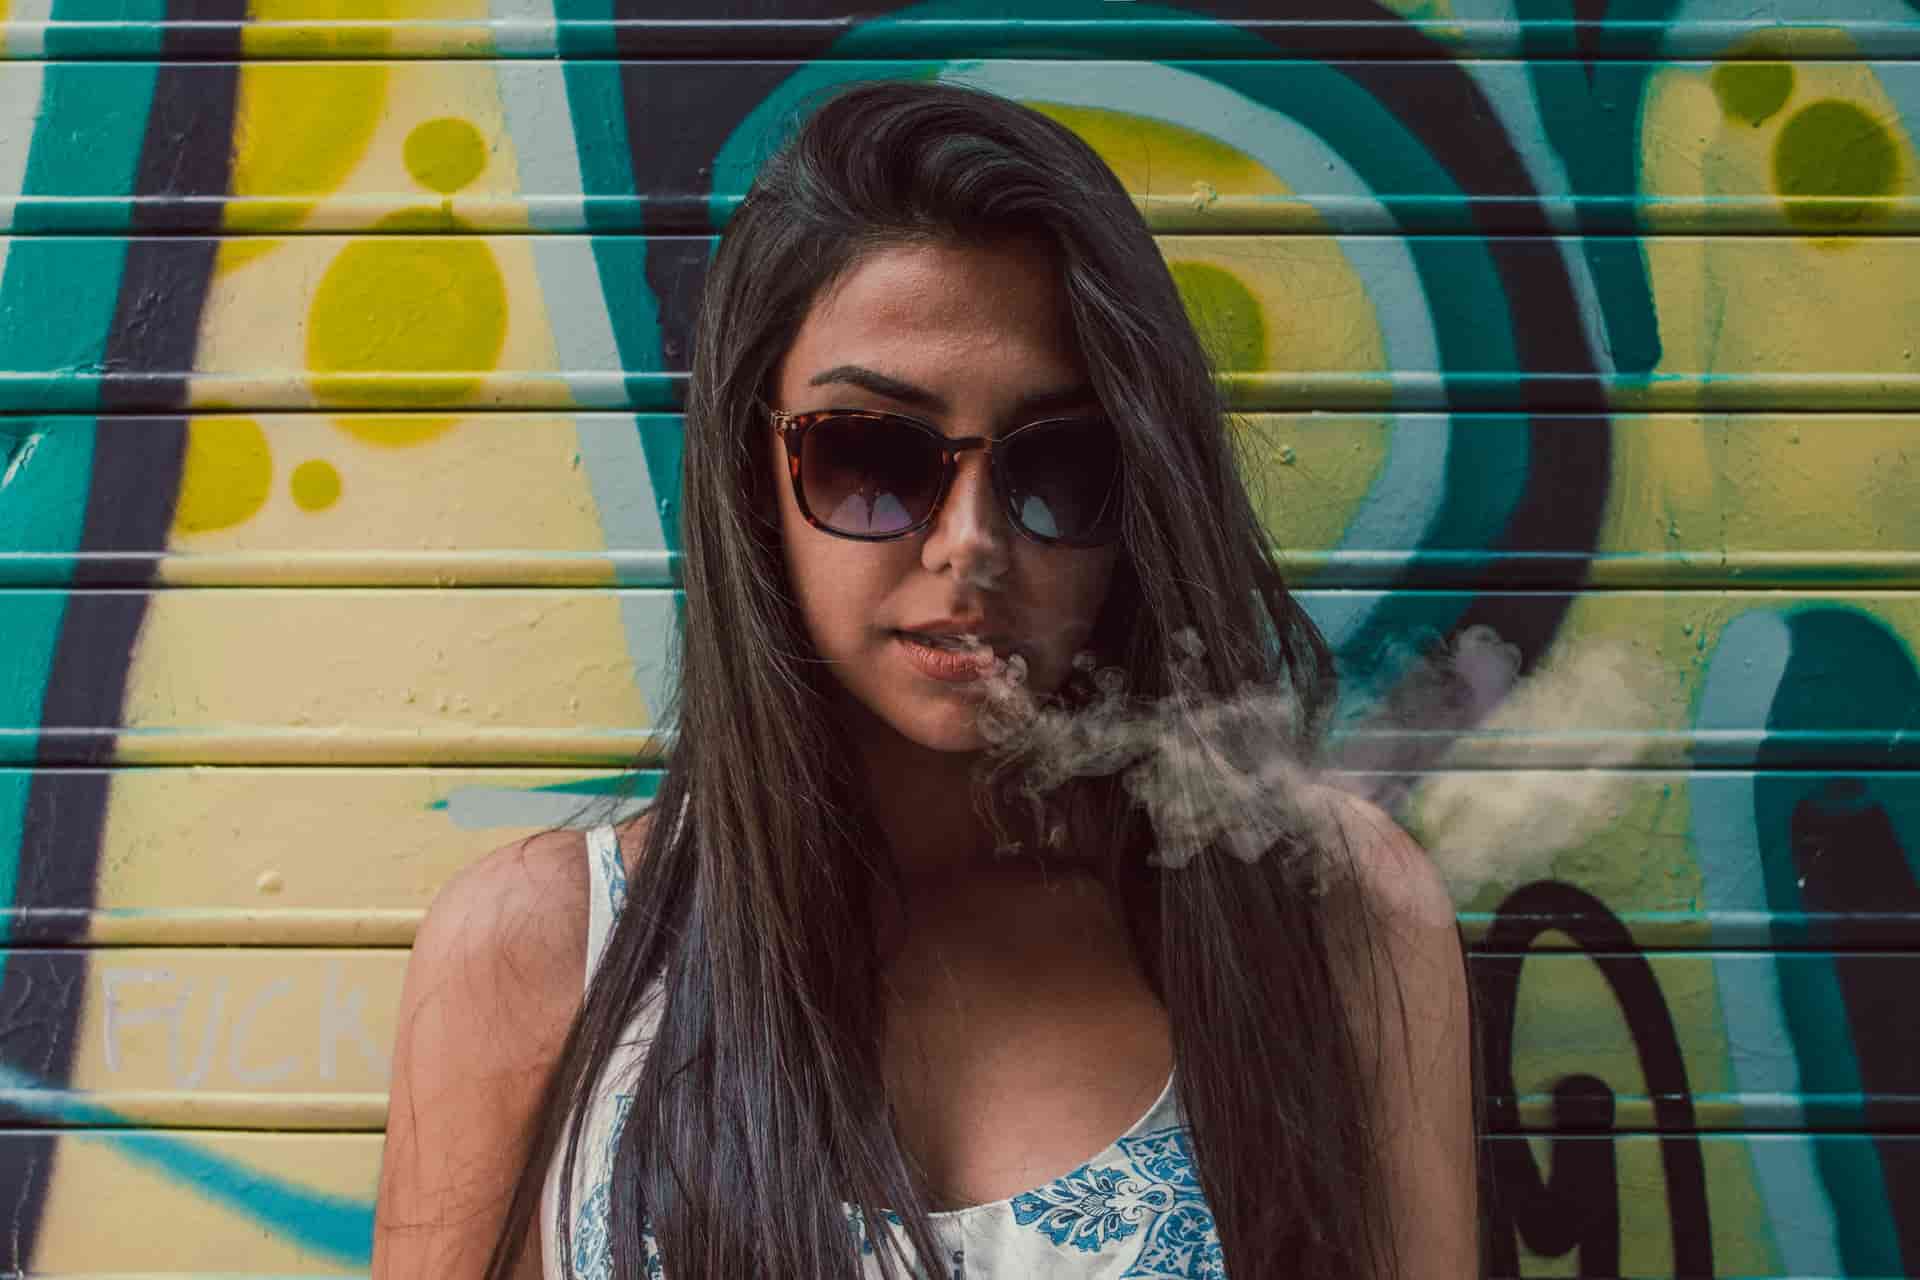 We Asked Australians What They Think About Cannabis and Here Are The Results